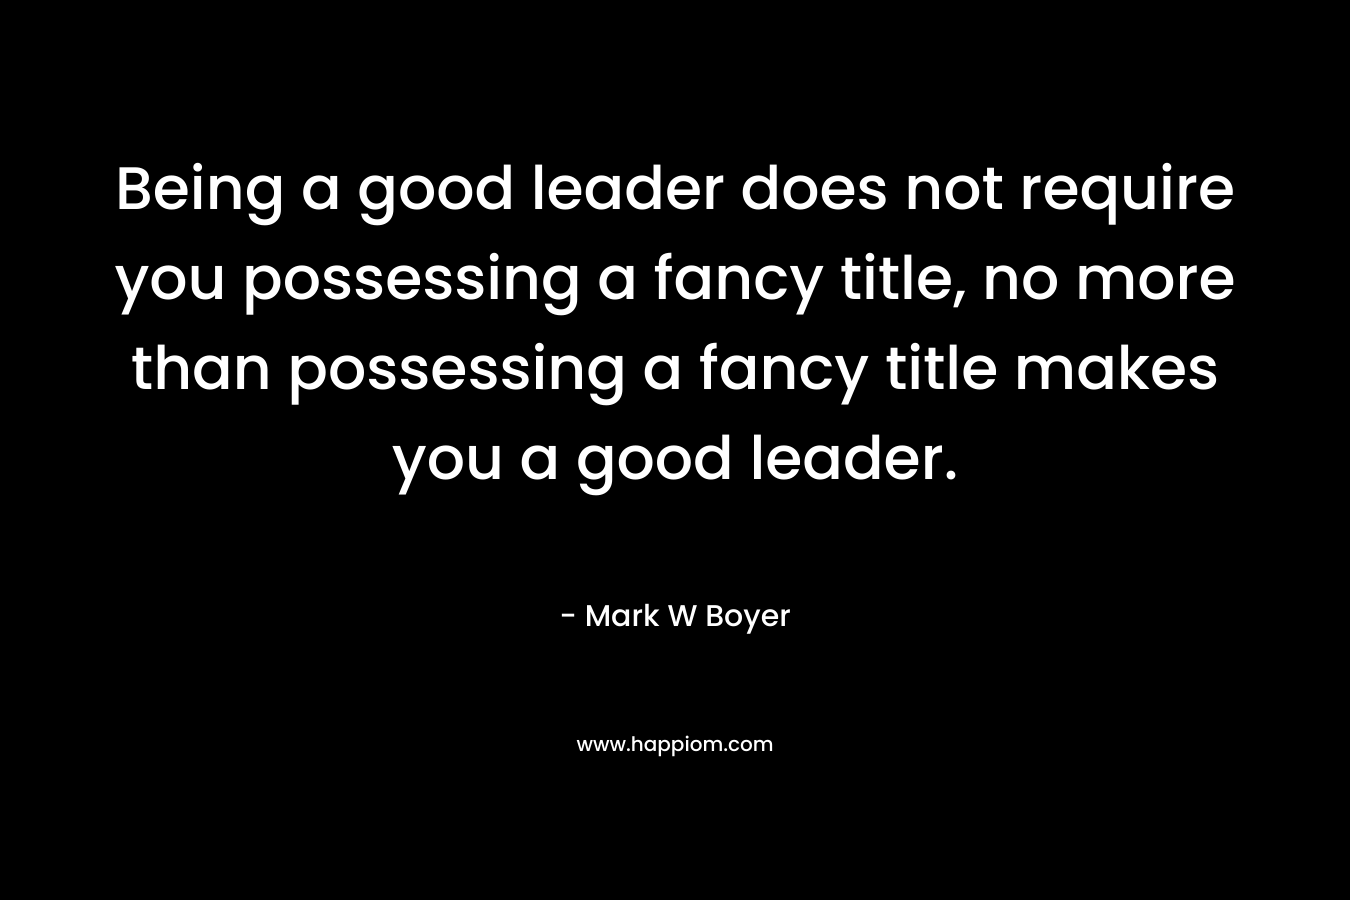 Being a good leader does not require you possessing a fancy title, no more than possessing a fancy title makes you a good leader.